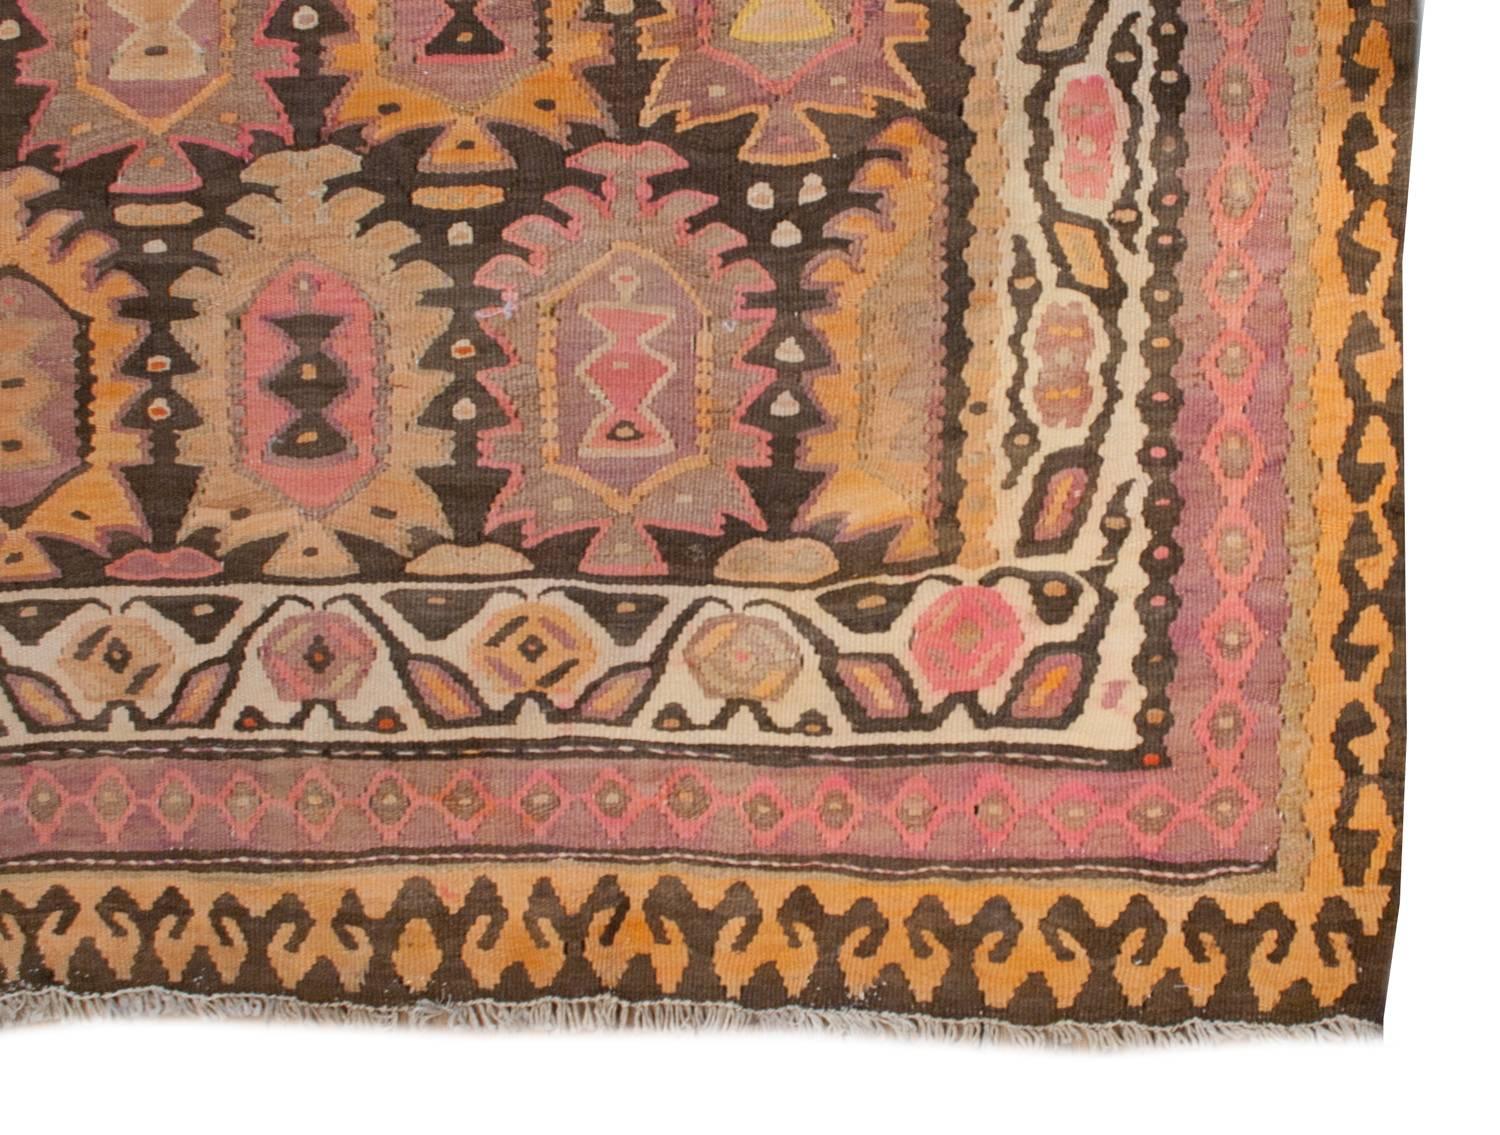 An early 20th century Persian Qazvin Kilim rug with a fantastic stylized multicolored tree-of-life pattern with woven in rich pink, gold, brown and cream wool. The border consists of three distinct patterns, one with stylized blossoms and vines, one